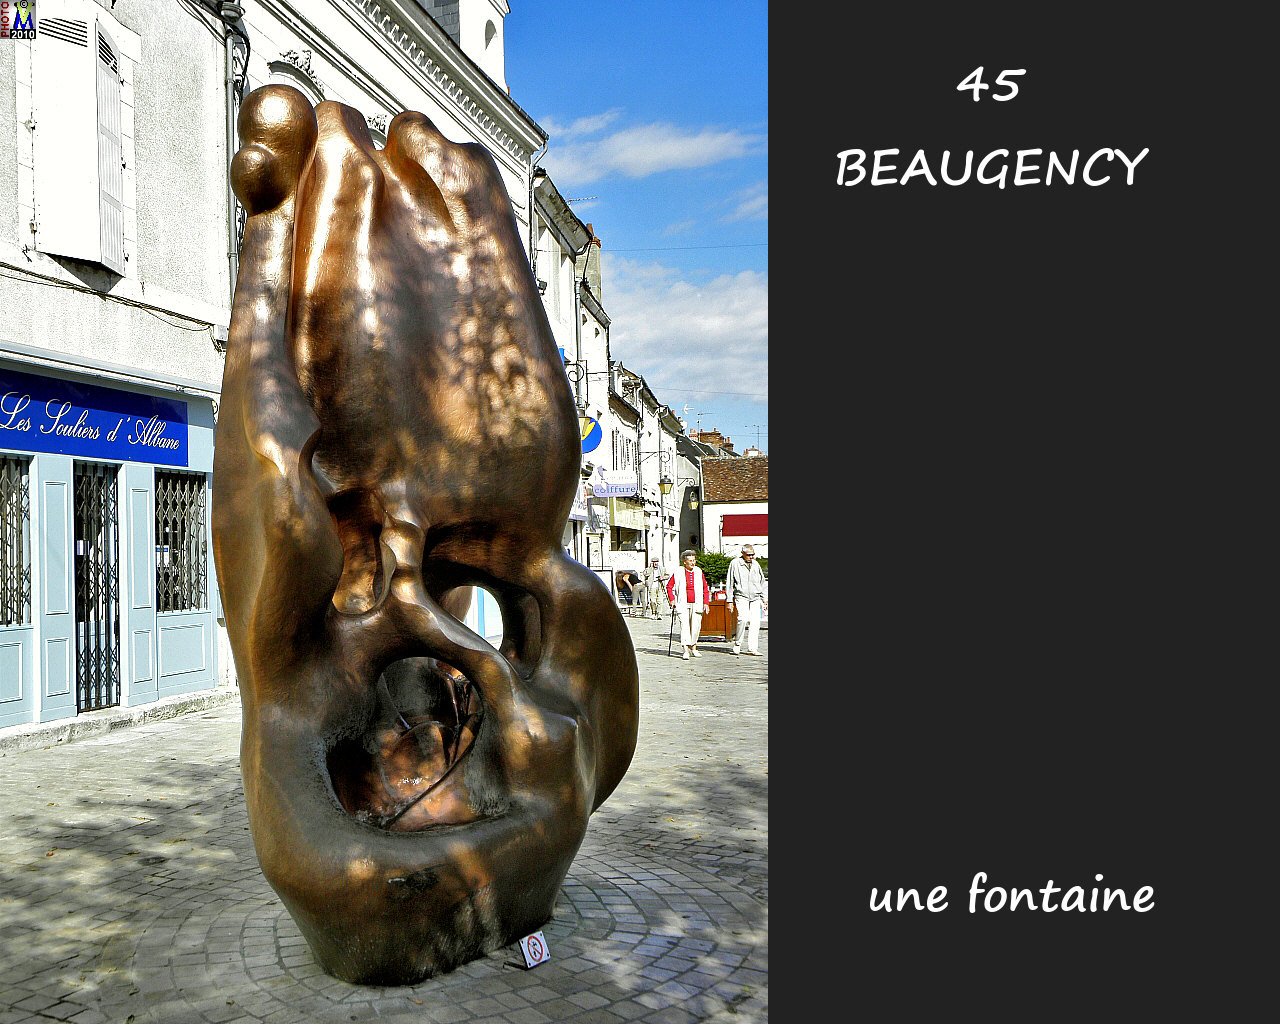 45BEAUGENCY_fontaine_102.jpg